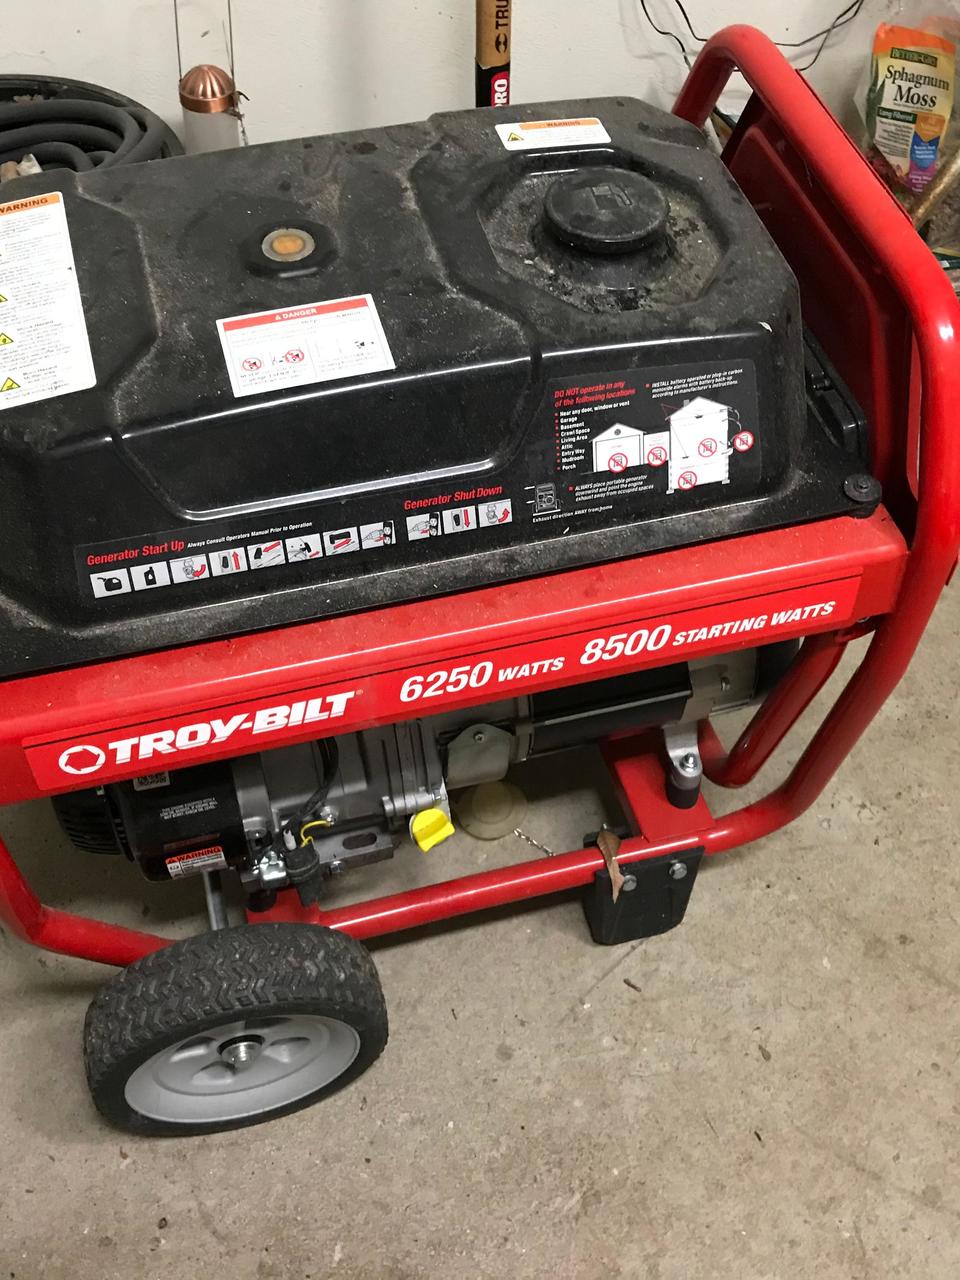 More People Are Buying Generators As The Threat Of Wildfire Season